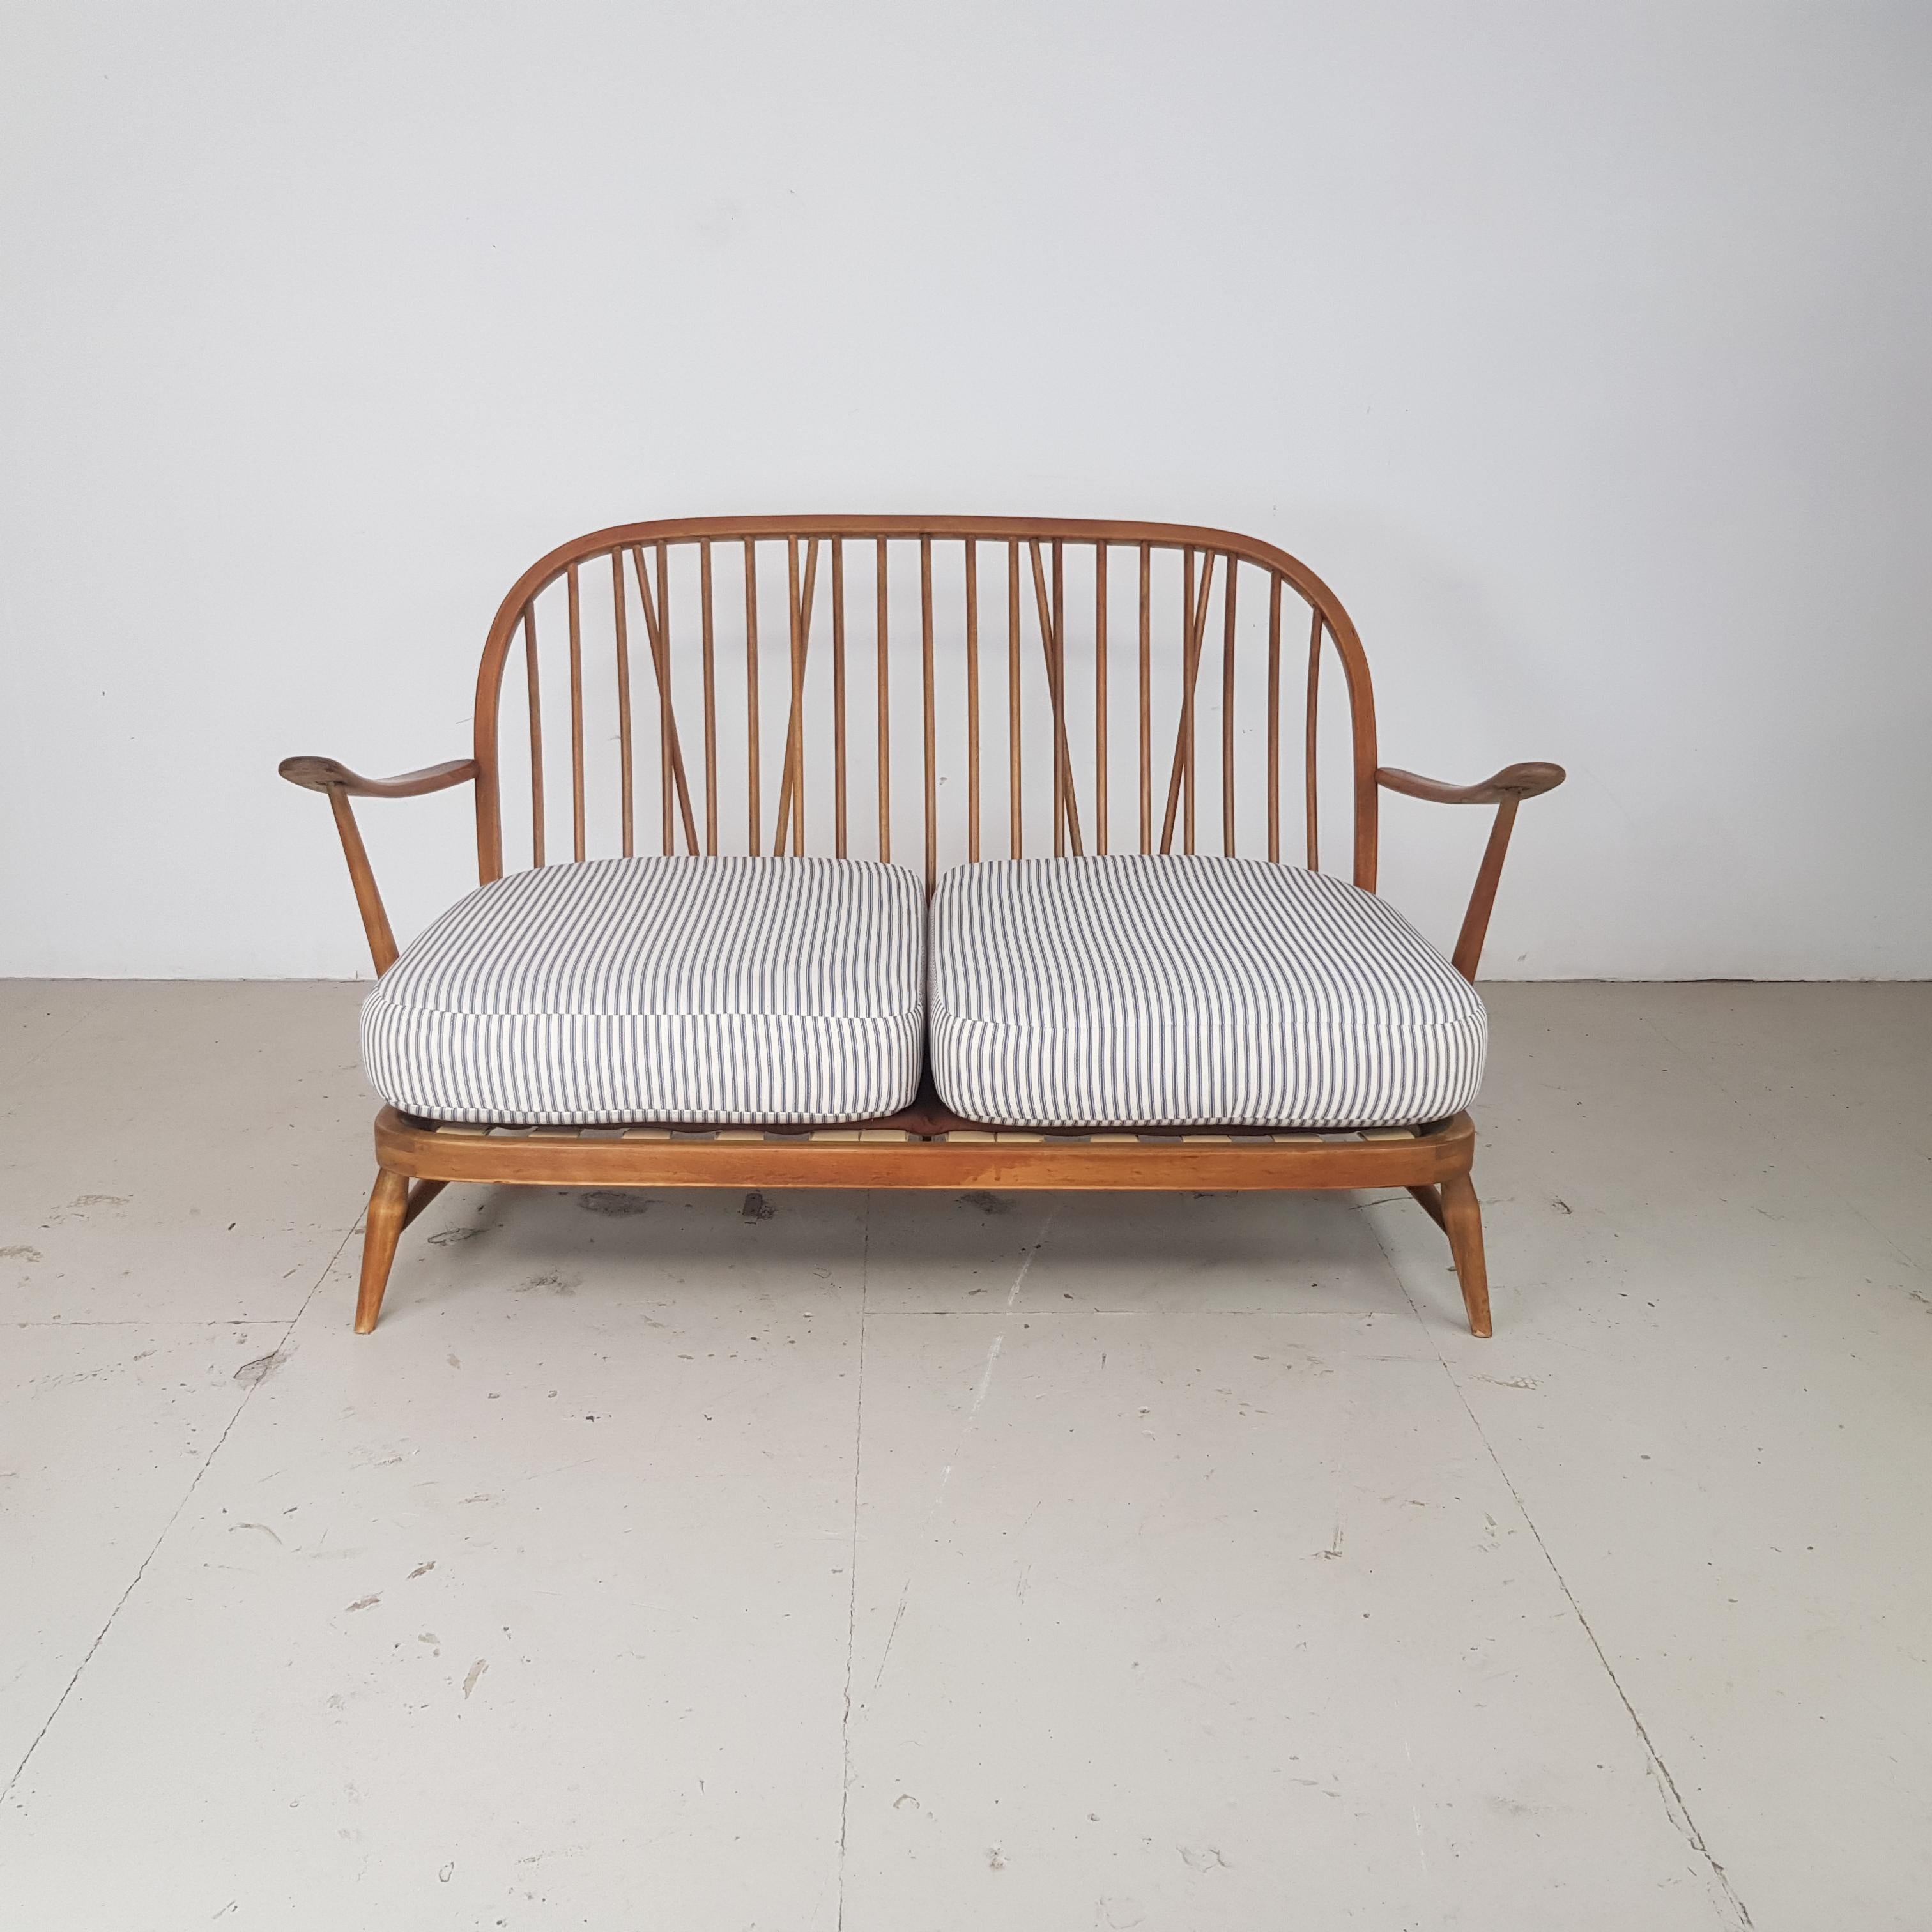 Refurbished blonde Ercol Windsor 2-seat sofa.

Newly upholstered in lovely French ticking. 

This piece is in good vintage condition.  The frame is solid and sturdy.  There are a few scuffs, scratches and marks commensurate with age but nothing